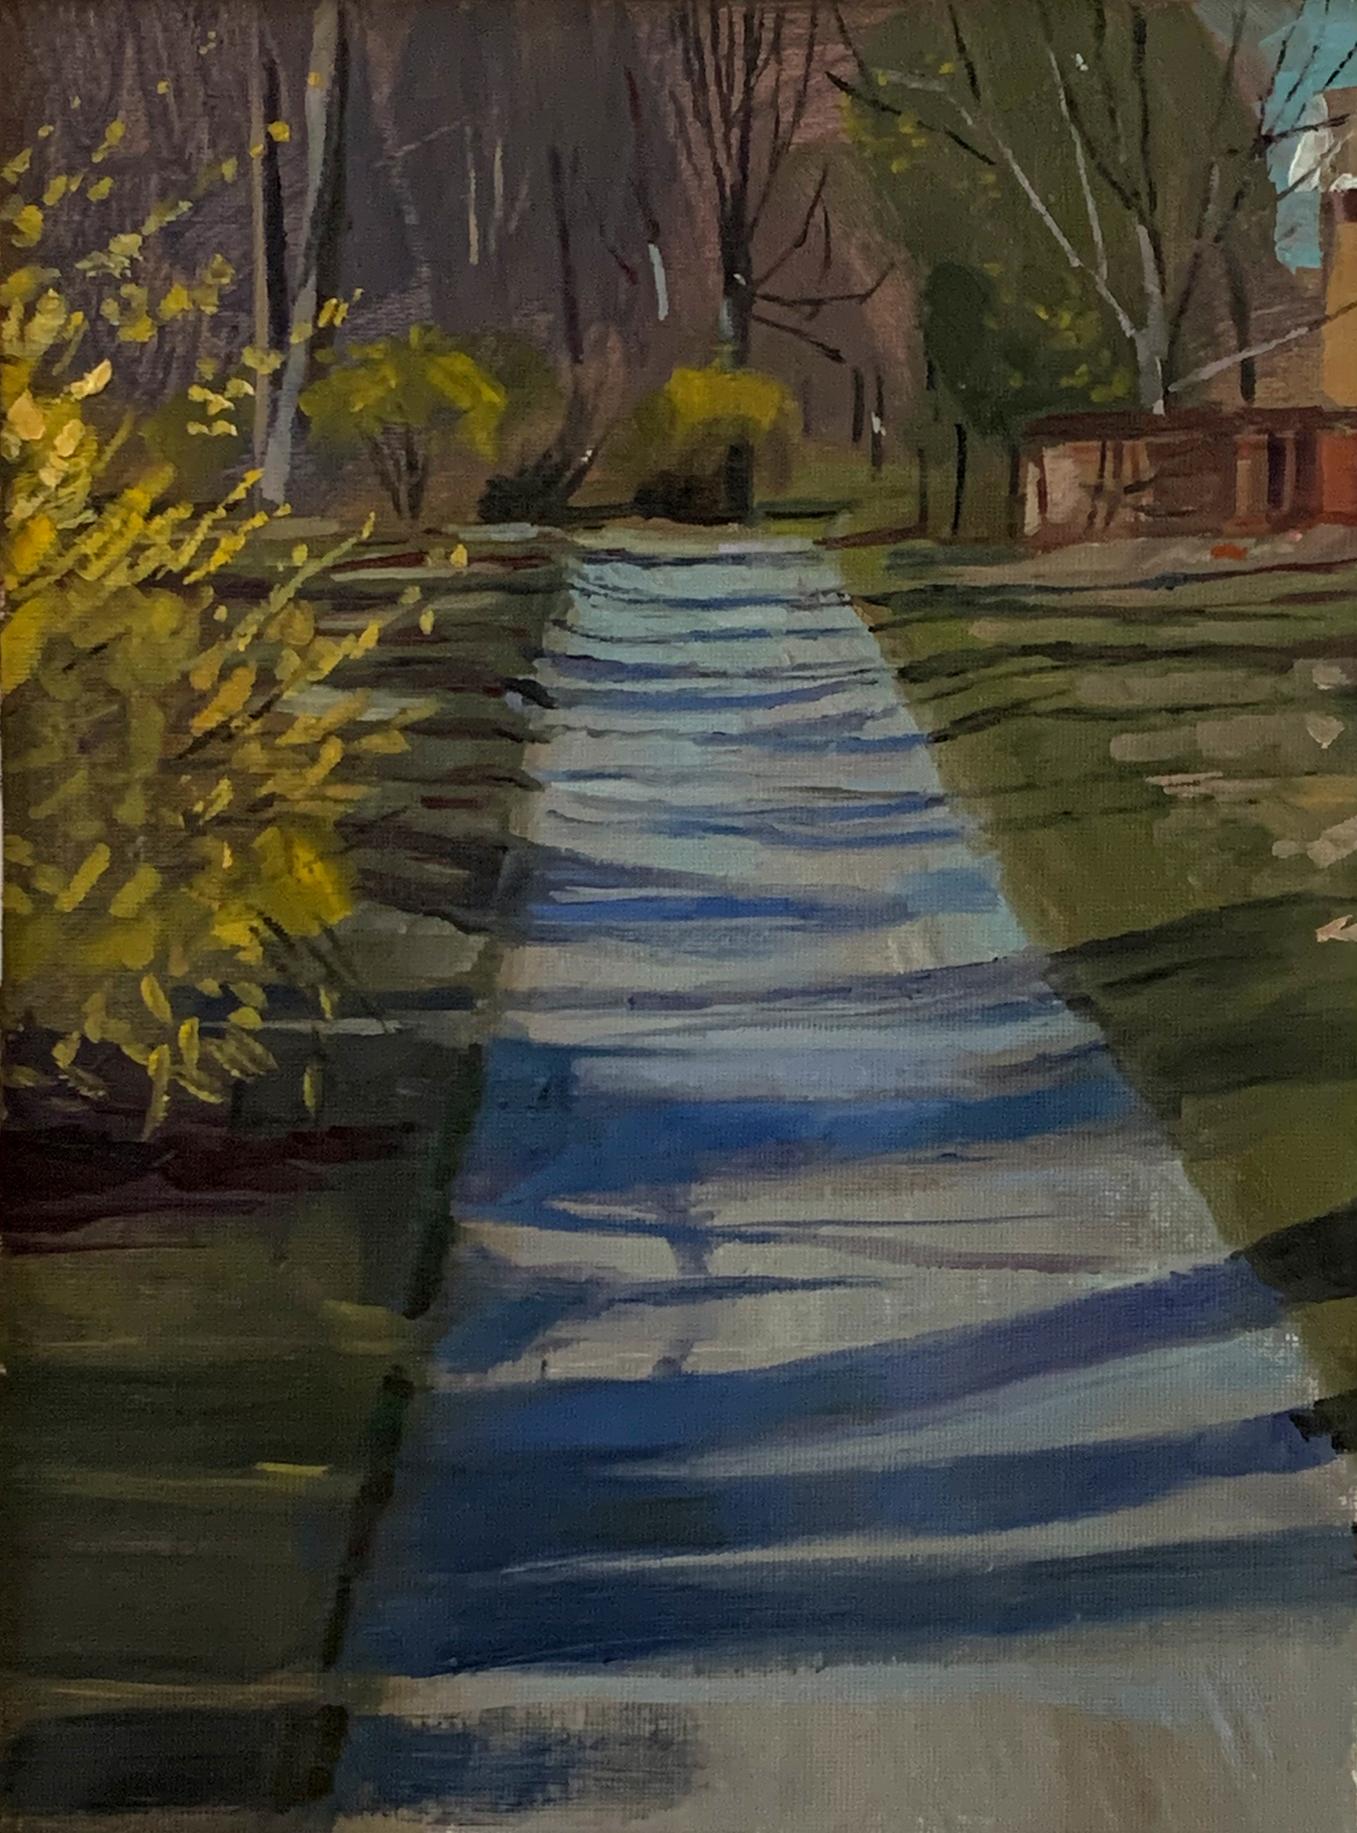 Carl Grauer Landscape Painting - April 11, 2021 #2 (Shadows on a Side Walk, Contemporary Landscape on canvas)